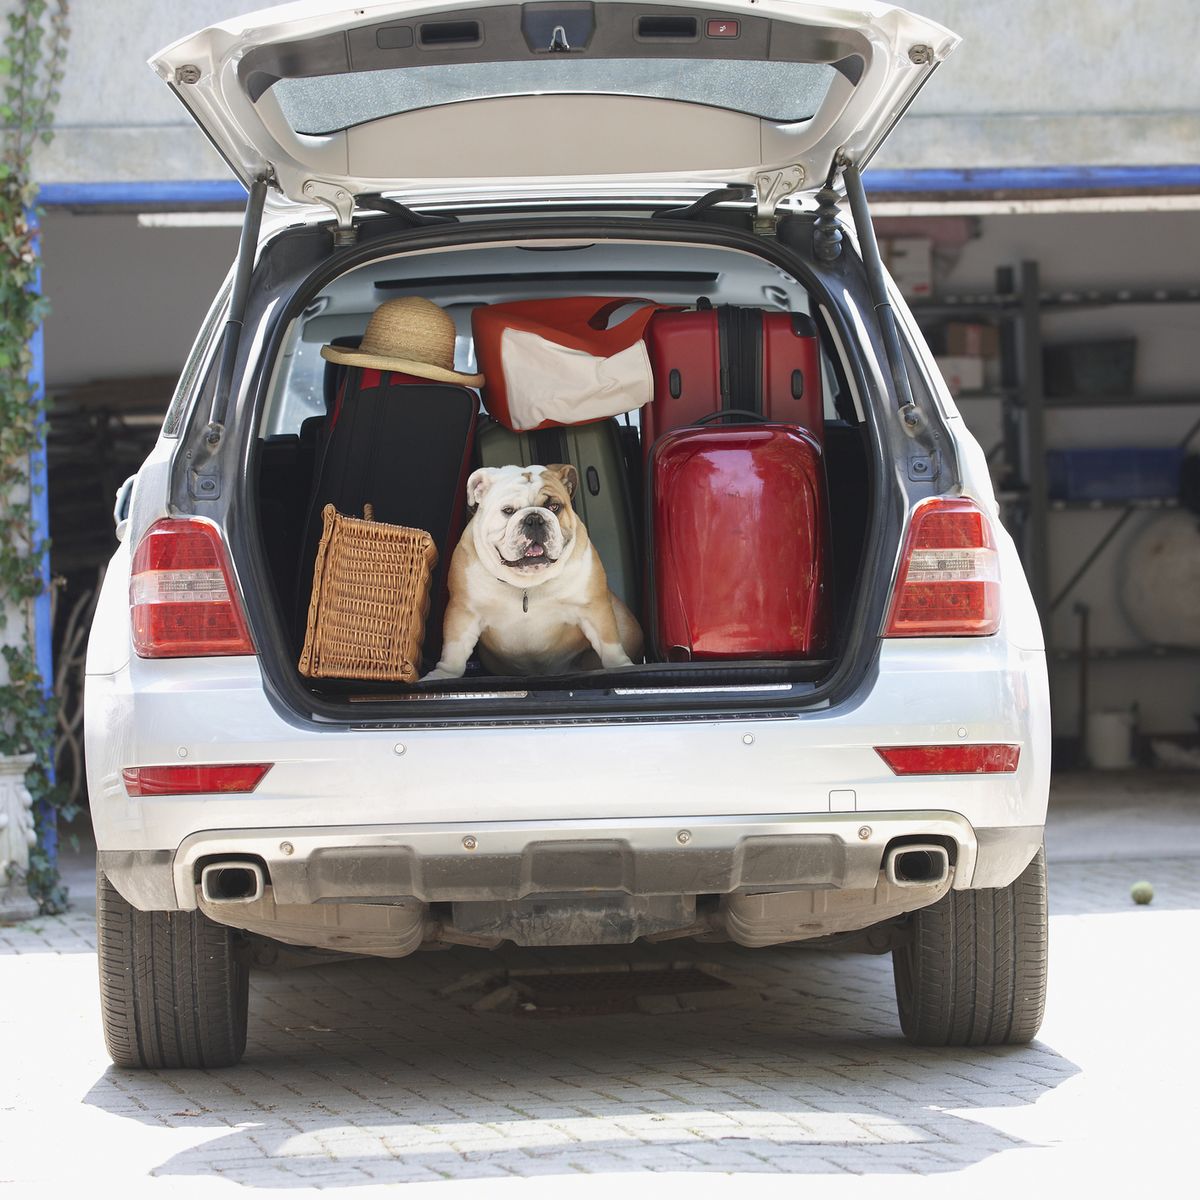 The Top-Rated Trunk Organizers for Groceries